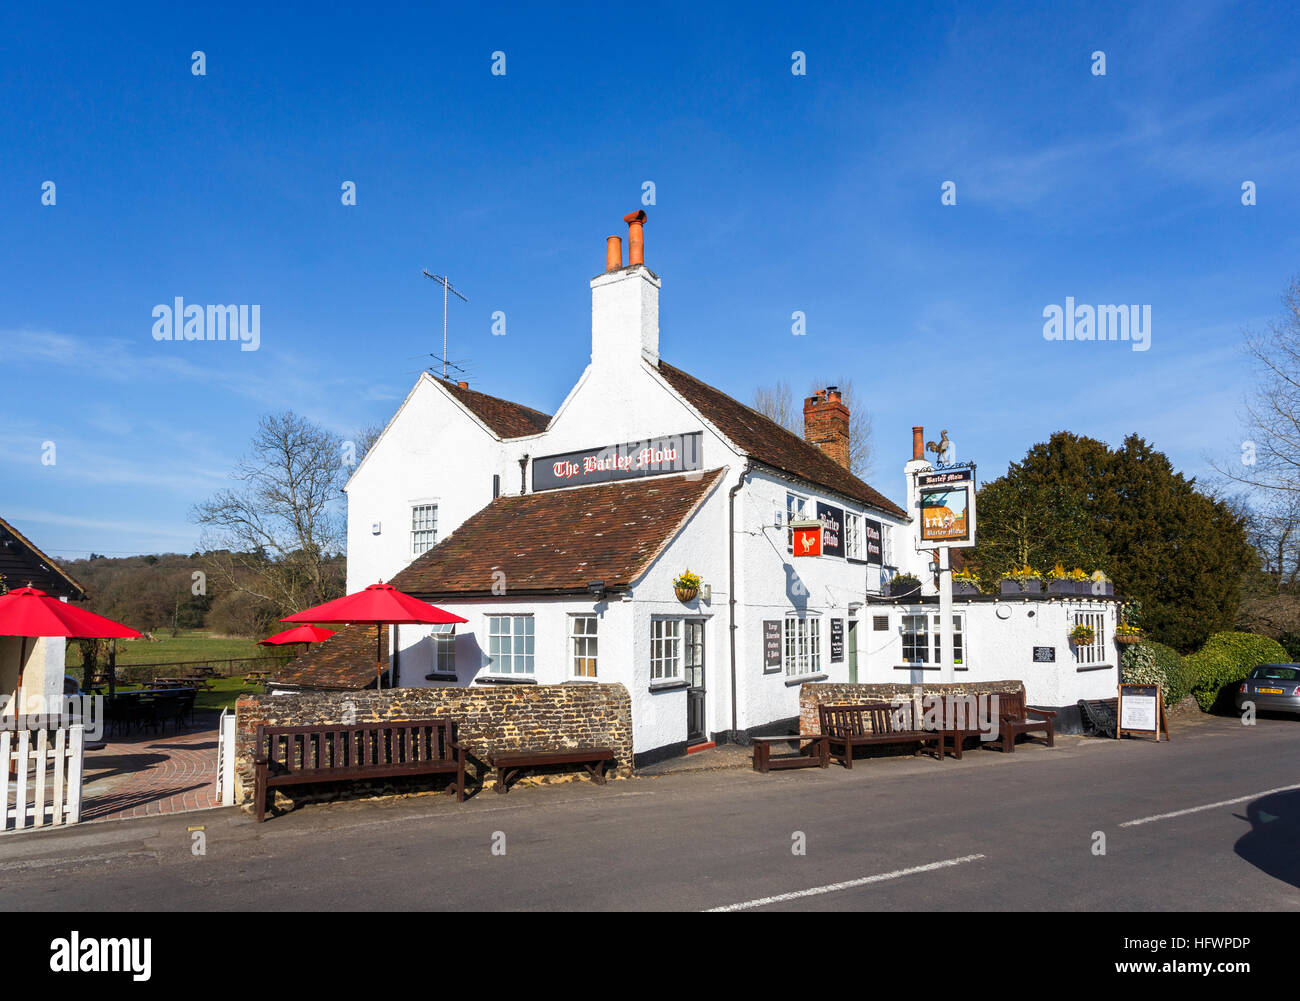 The Barley Mow, a traditional whitewashed country pub on Tilford Green in Tilford, a small village near Farnham, Surrey, UK, on a spring day with blue Stock Photo